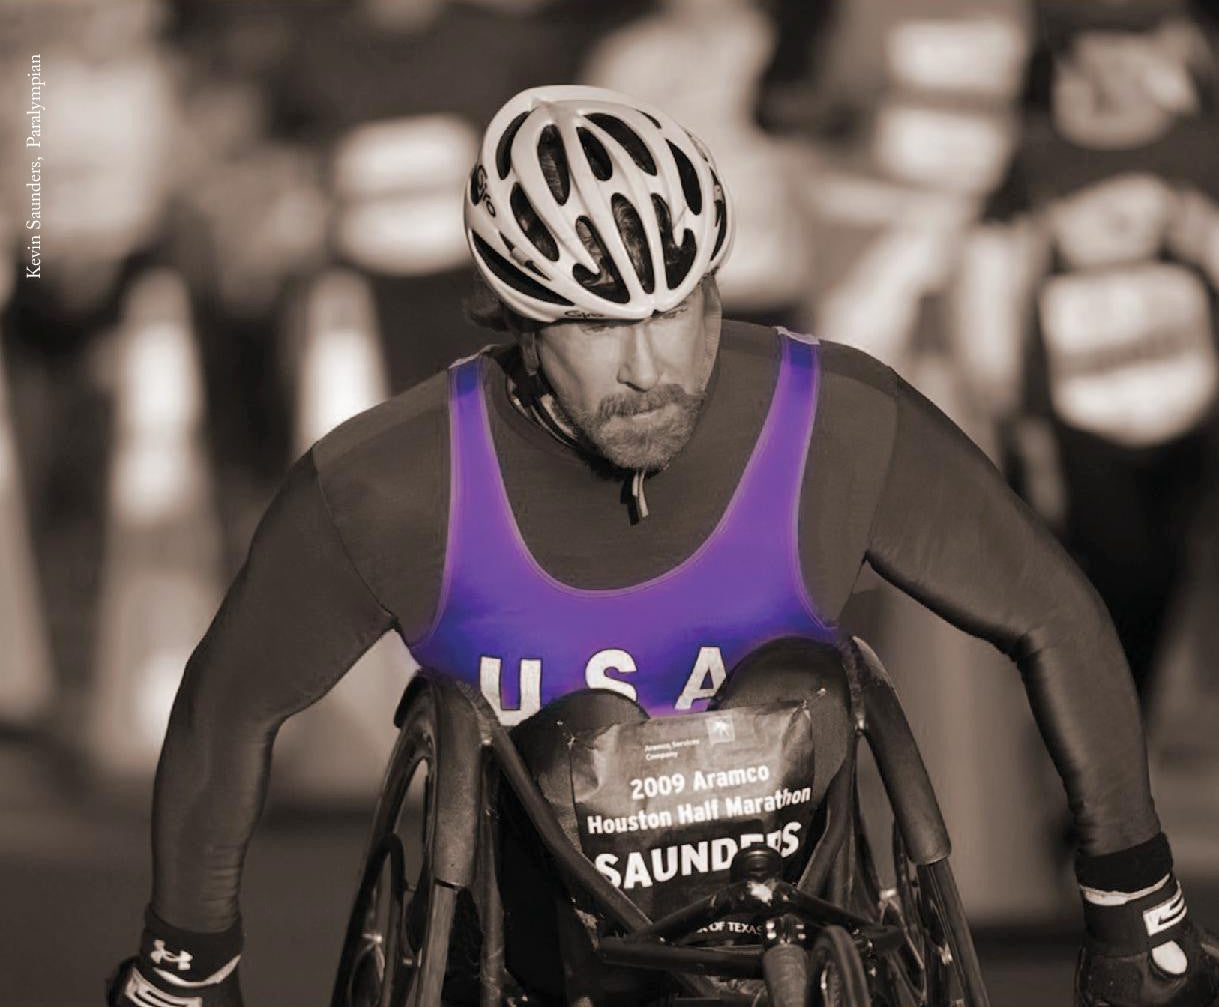 Kevin Saunders - World Champion Wheelchair Athlete ["...I have increased energy and quicker recovery..."]